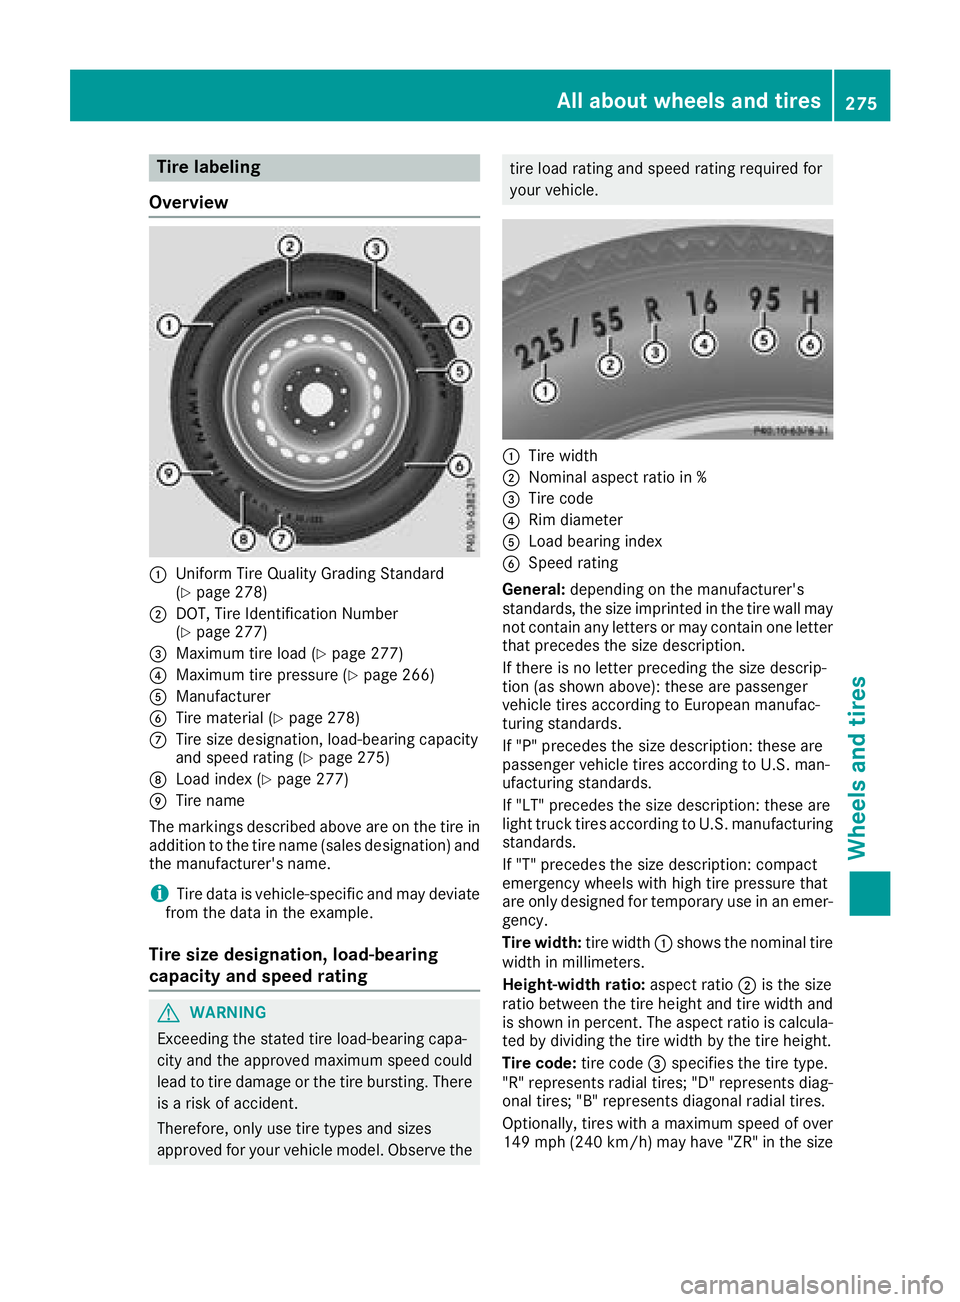 MERCEDES-BENZ SLC ROADSTER 2018  Owners Manual Tire labeling
Overview
:Unifor mTireQ ualit yGradin gStandard
(Ypage 278)
;DOT, Tire Identification Number
(Ypage 277)
=Maximum tire load (Ypage 277)
?Maximum tire pressure (Ypage 266)
AManufacturer
B